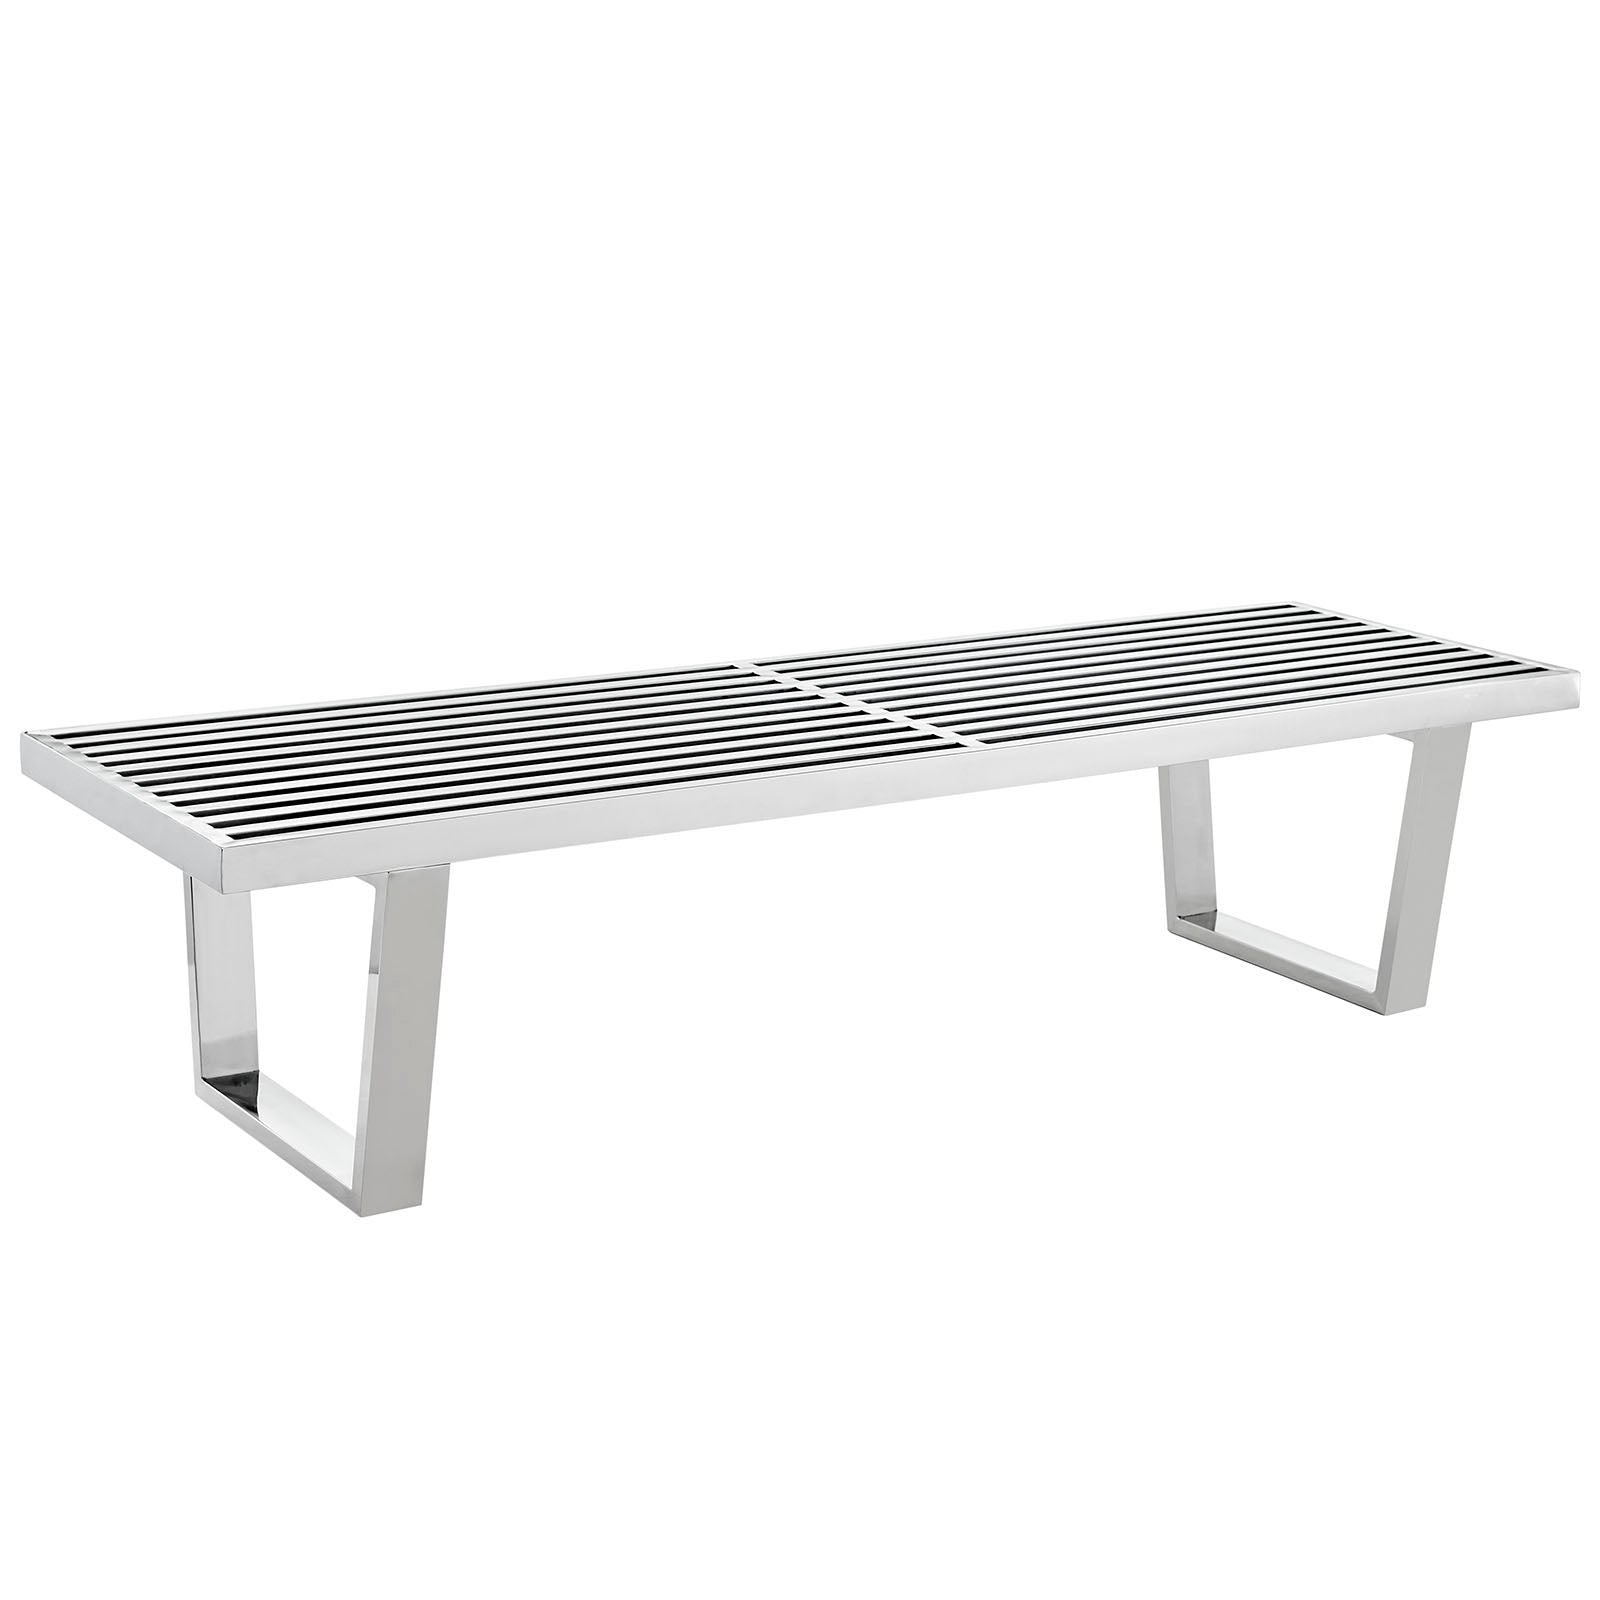 Sauna 5' Stainless Steel Bench - East Shore Modern Home Furnishings